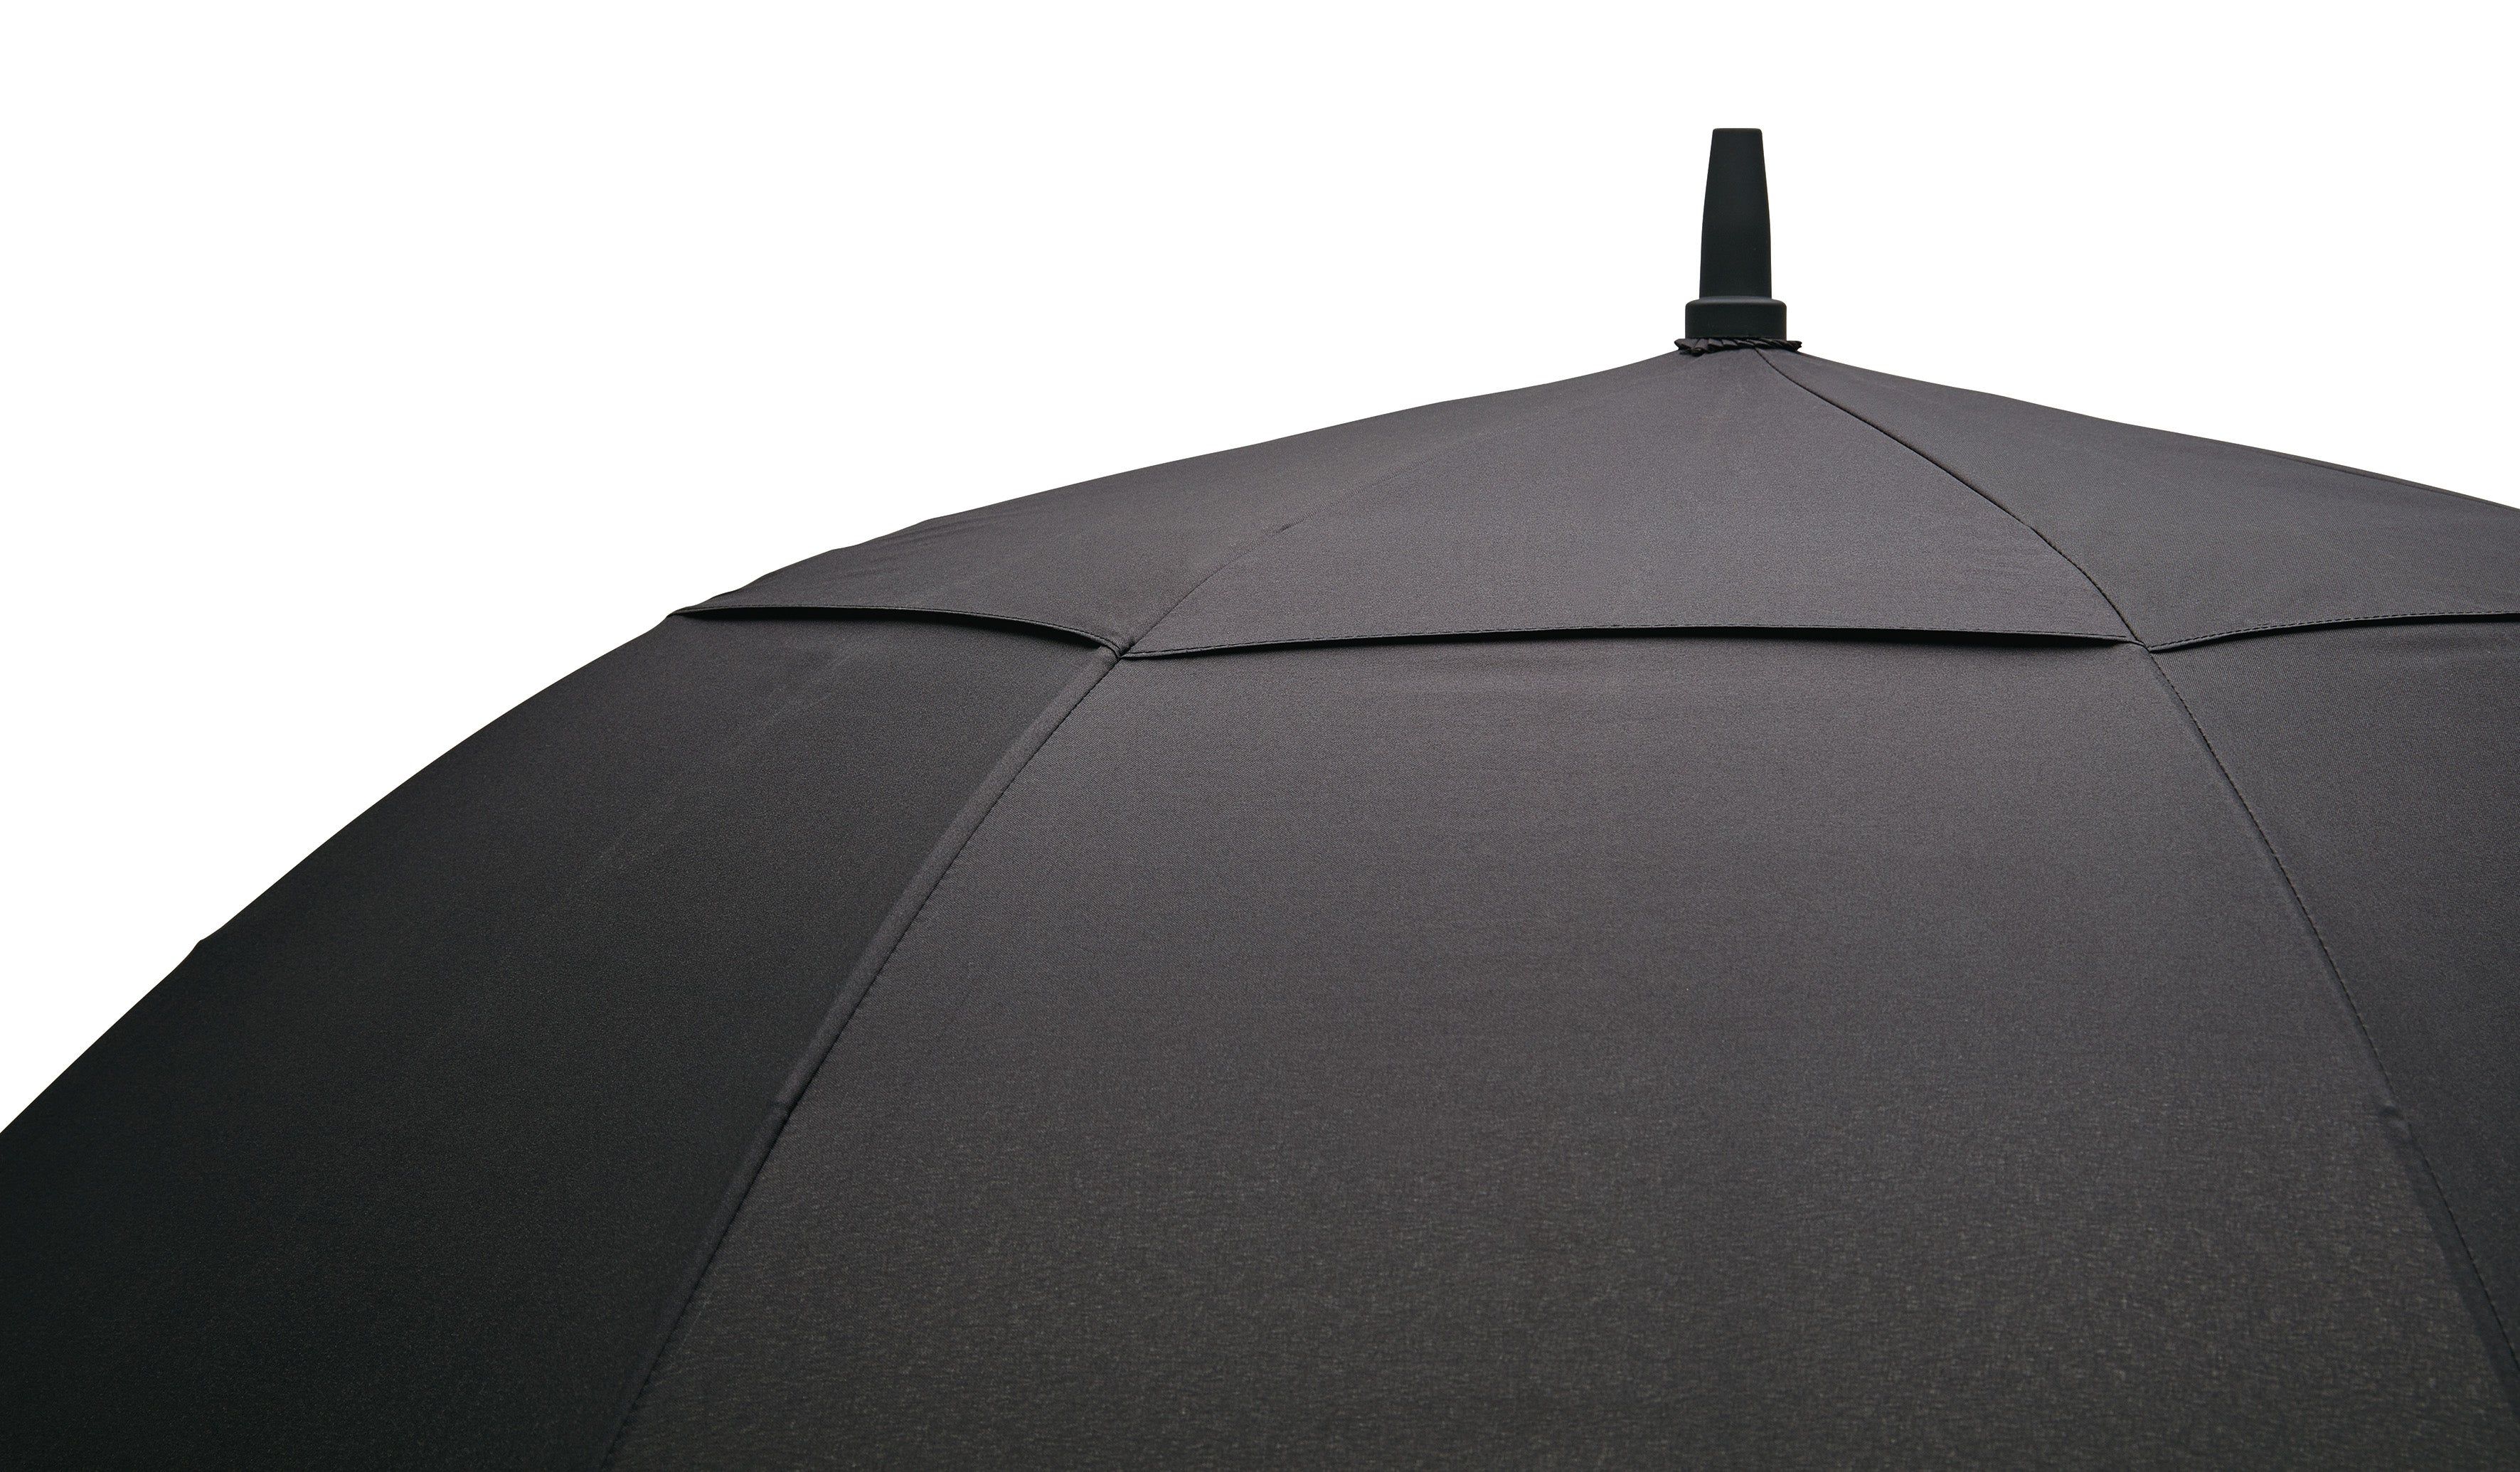 SWISS PEAK®️ TORNADO Heavy Duty Umbrella With Double Layer Wind Vent System, Wind Proof Fibreglass Frame - Auto-Open Push Button Feature